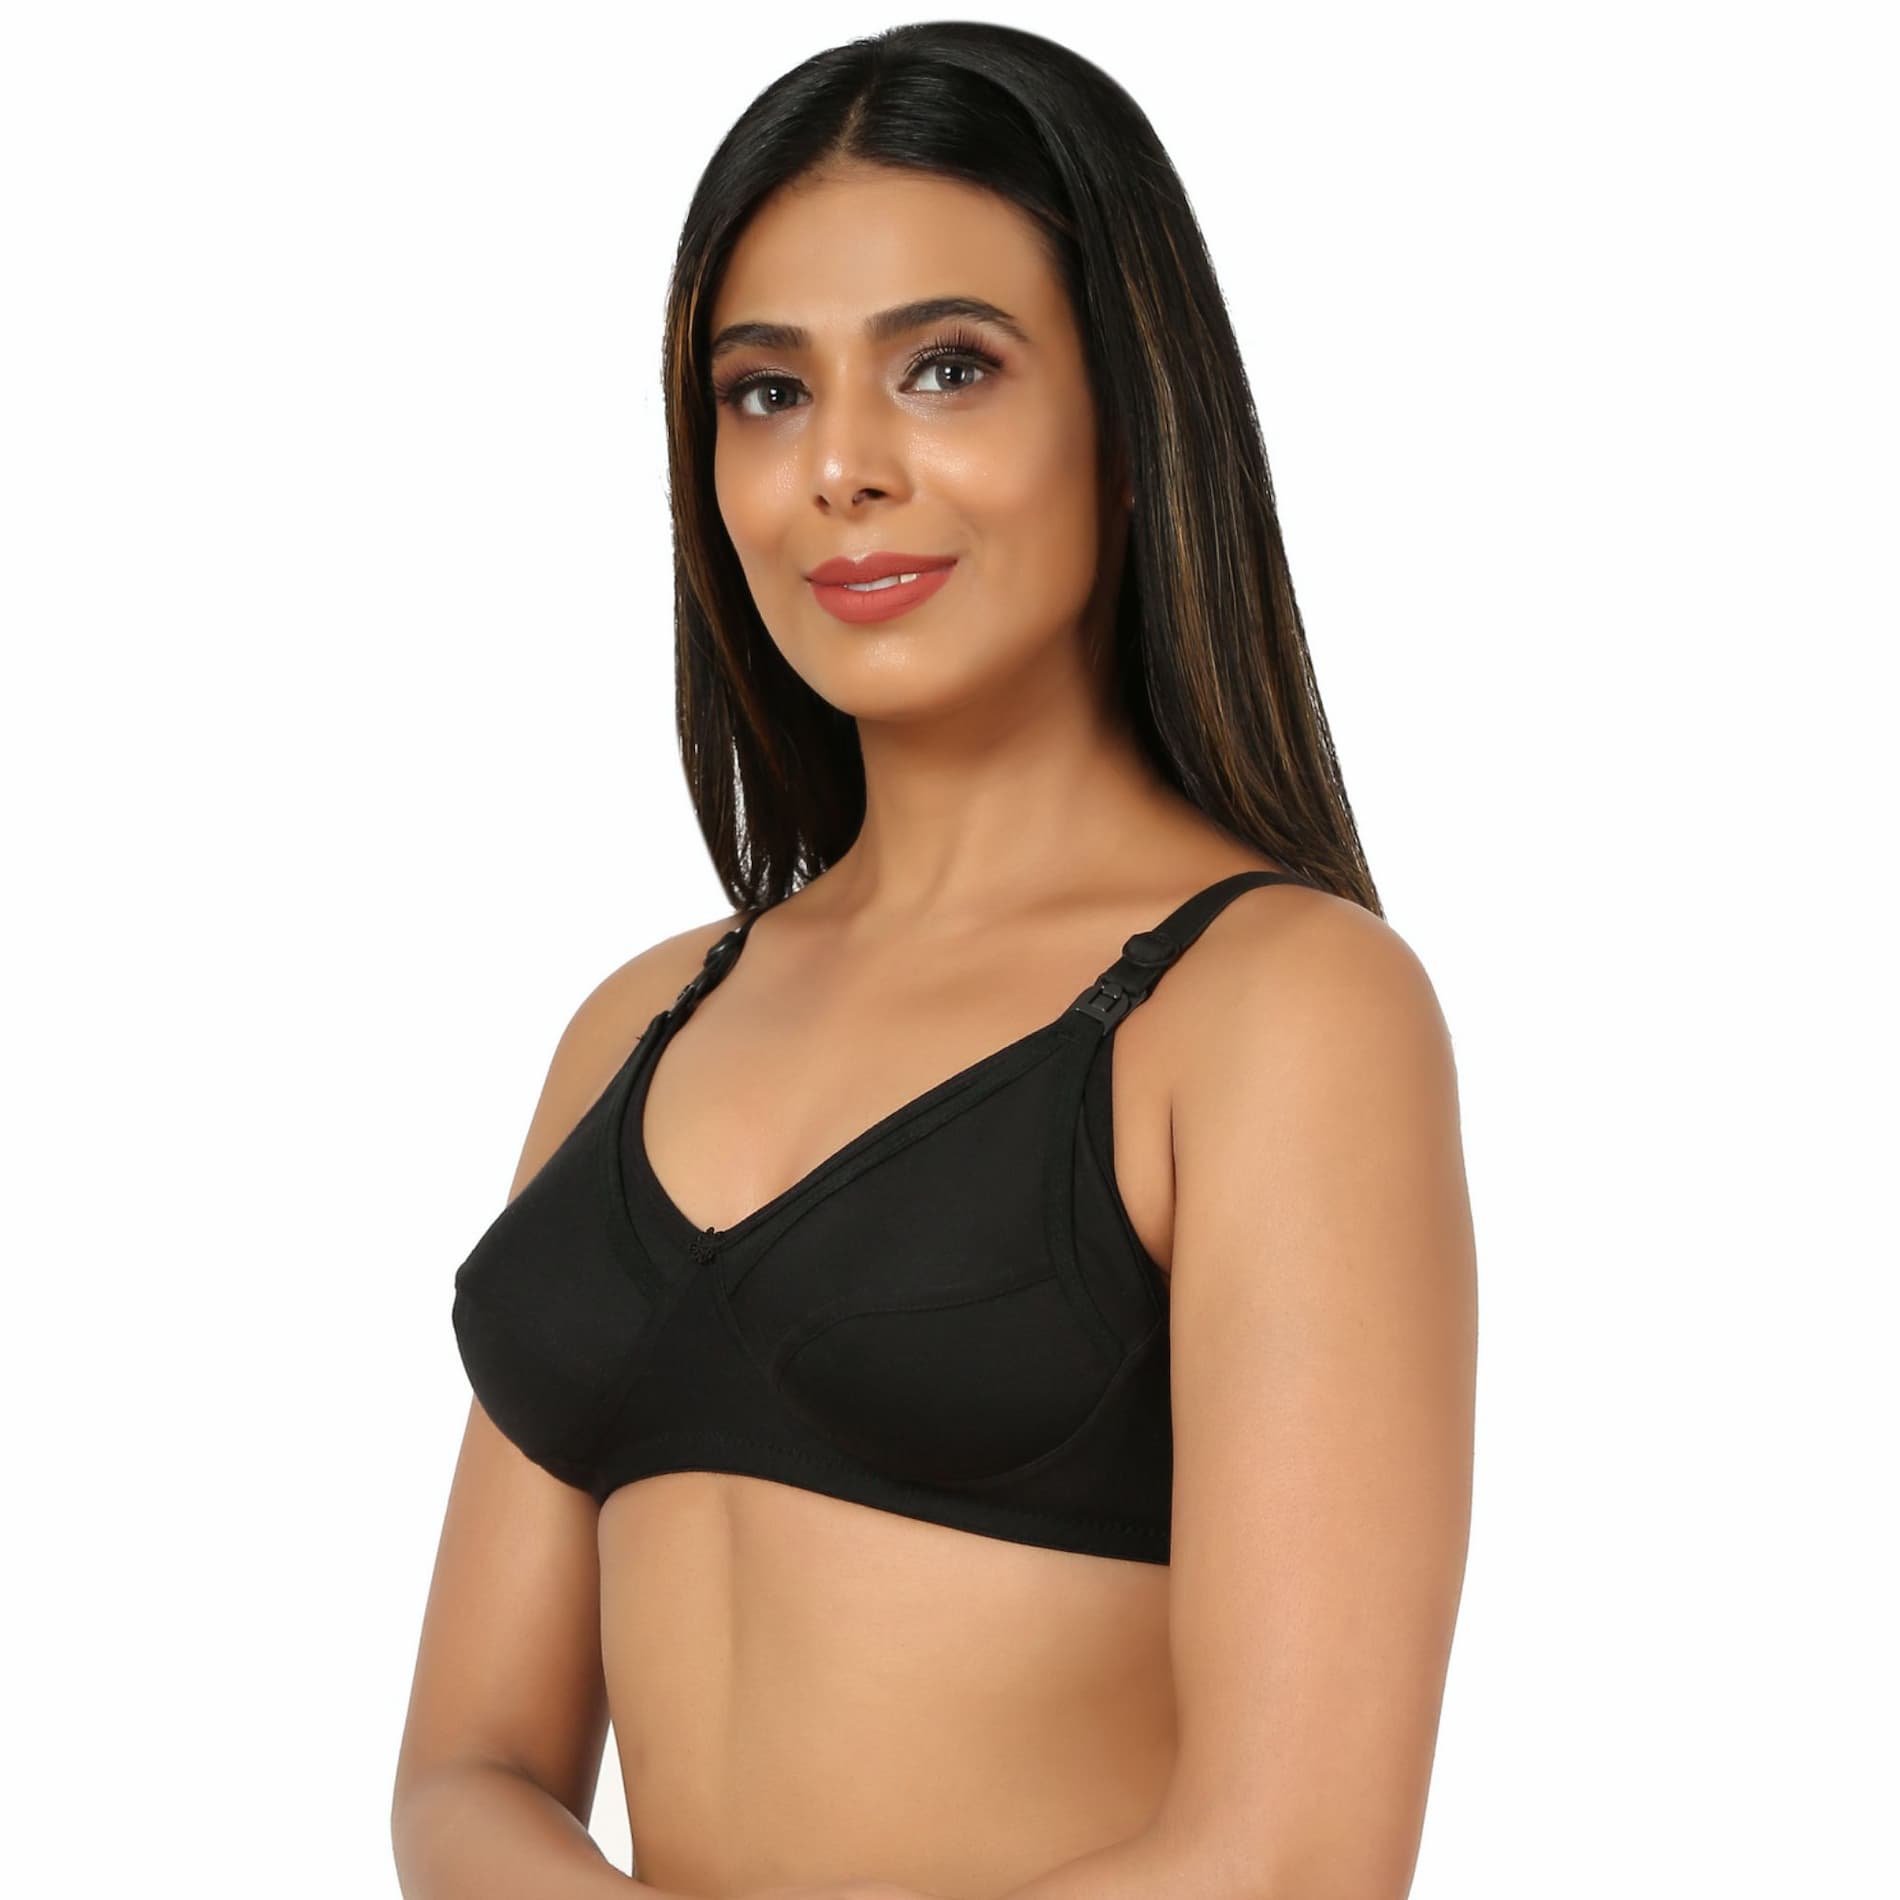 Maternity/Nursing Bras Non-Wired, Non-Padded with free Bra Extender - Classic Black 38 B 